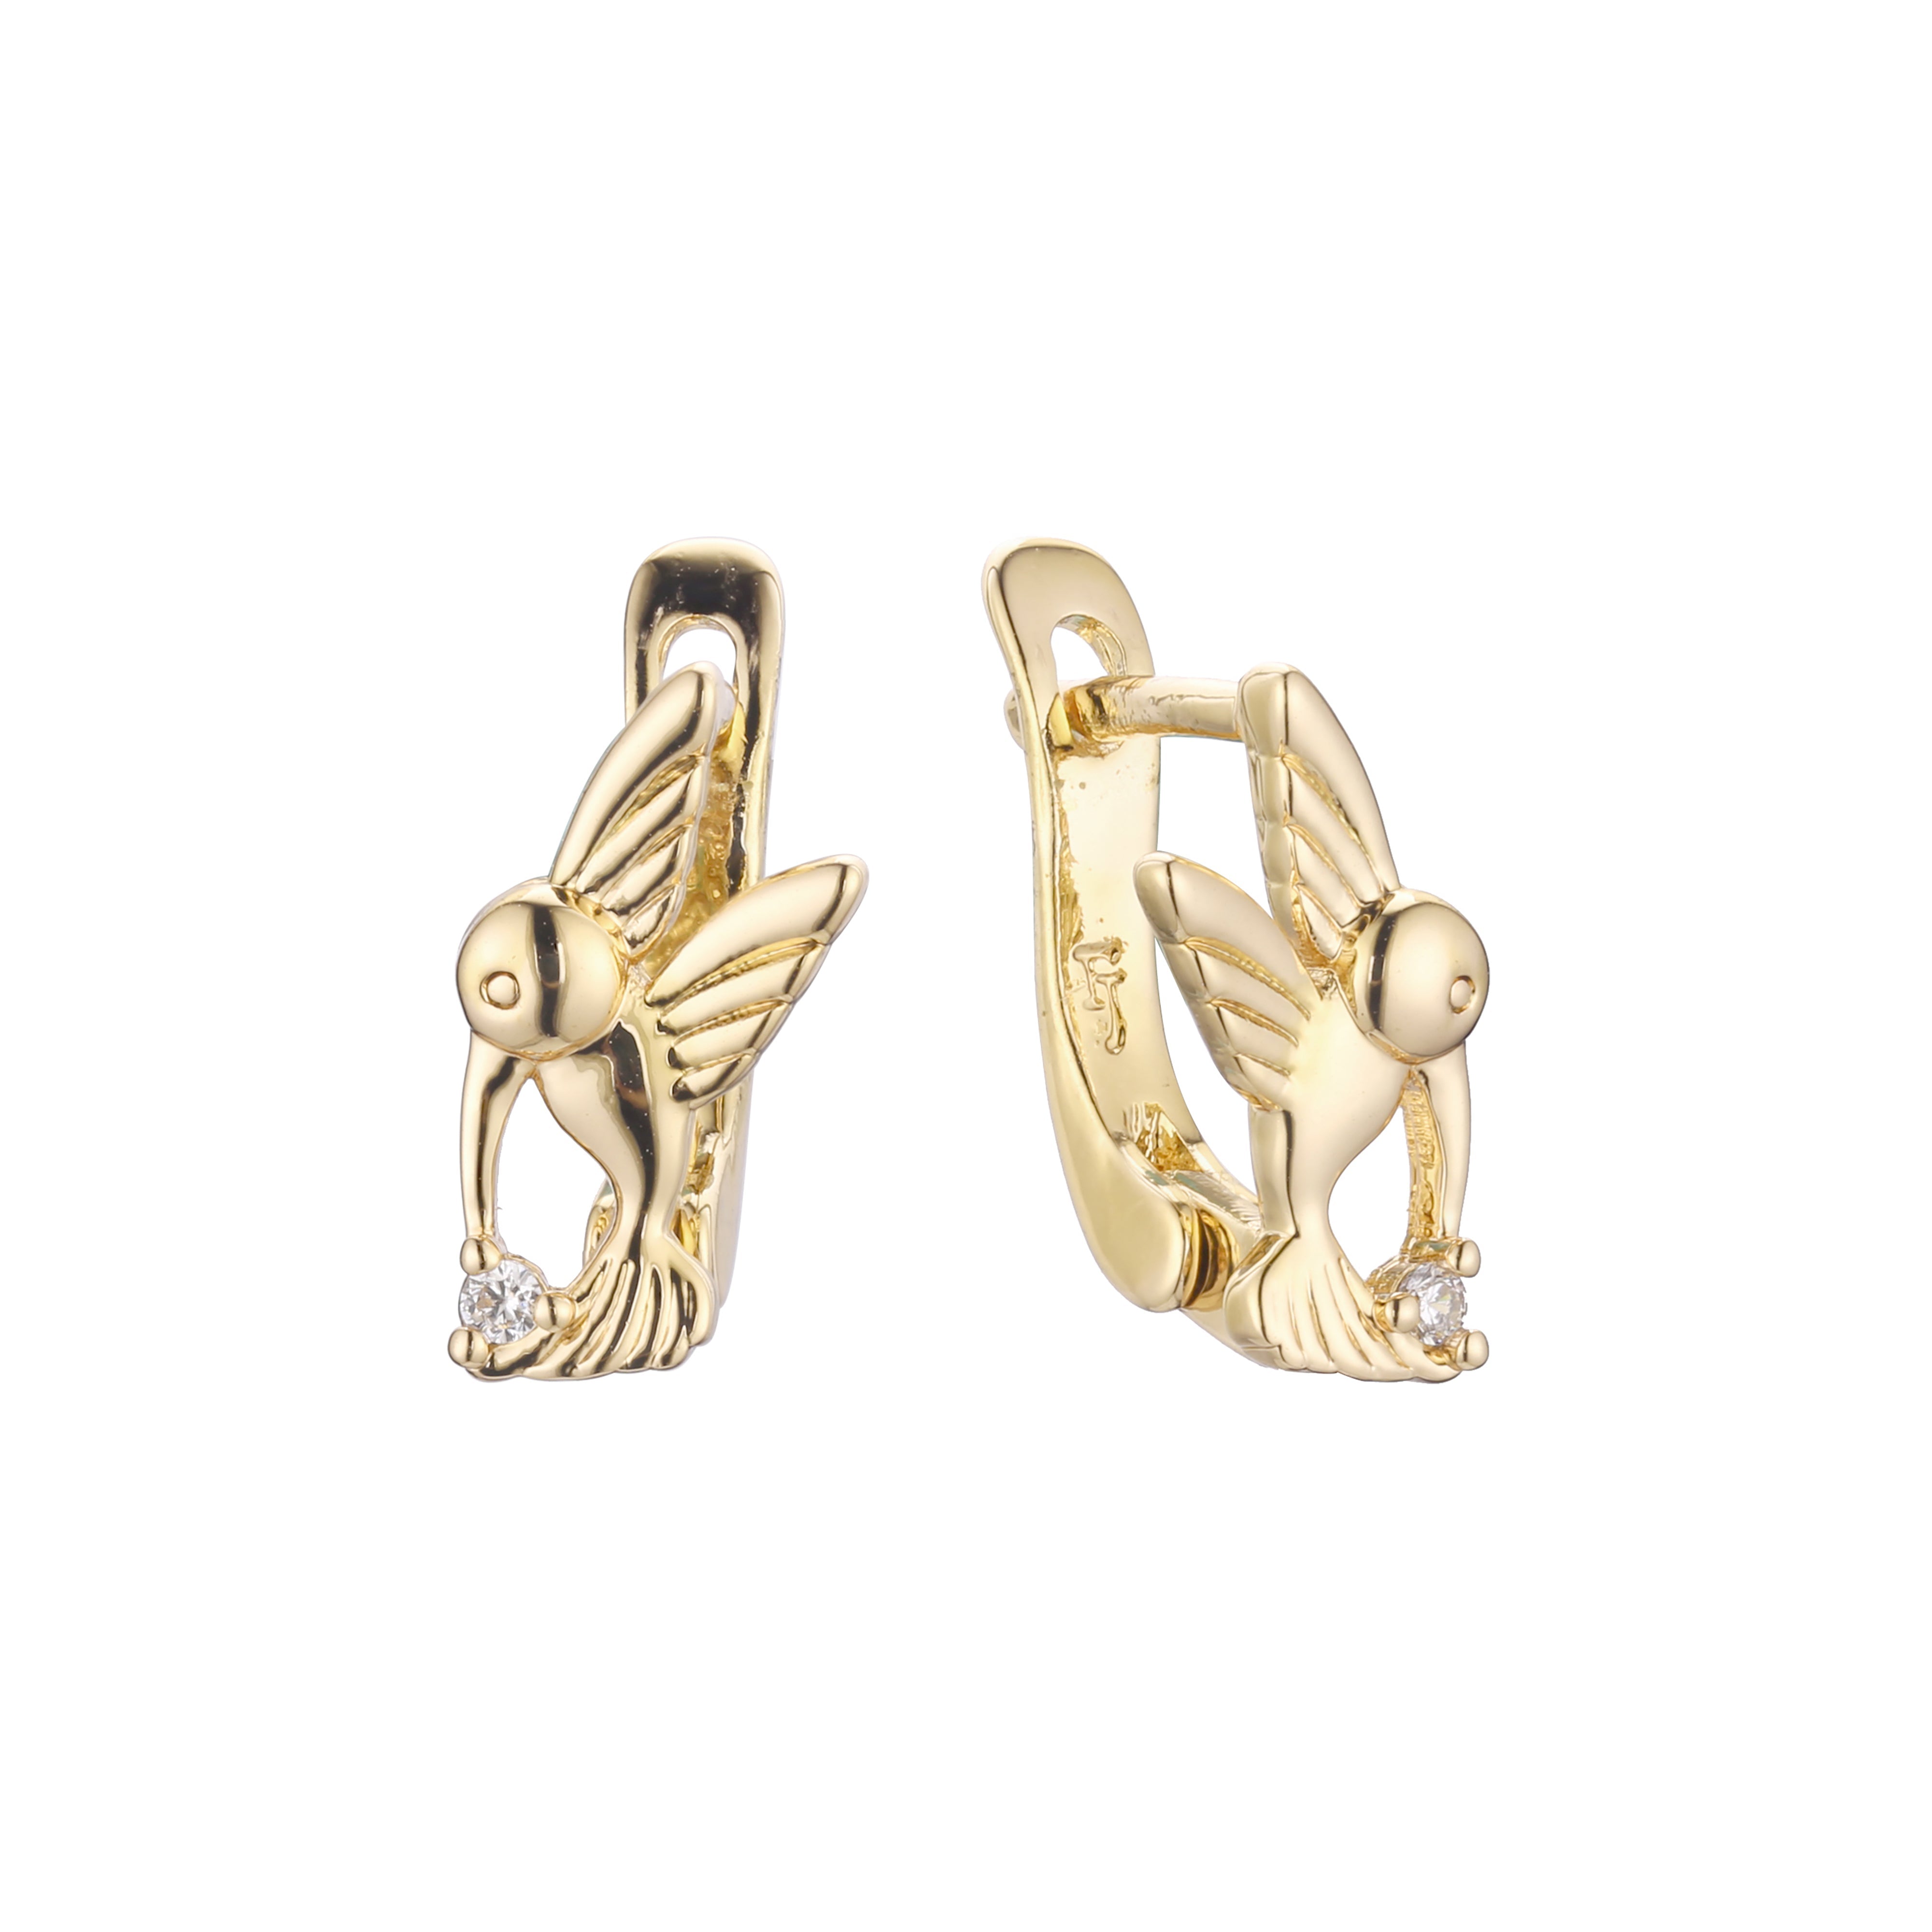 .Mia's Humming Bird - Bird child earrings in 14K Gold, Rose Gold plating colors